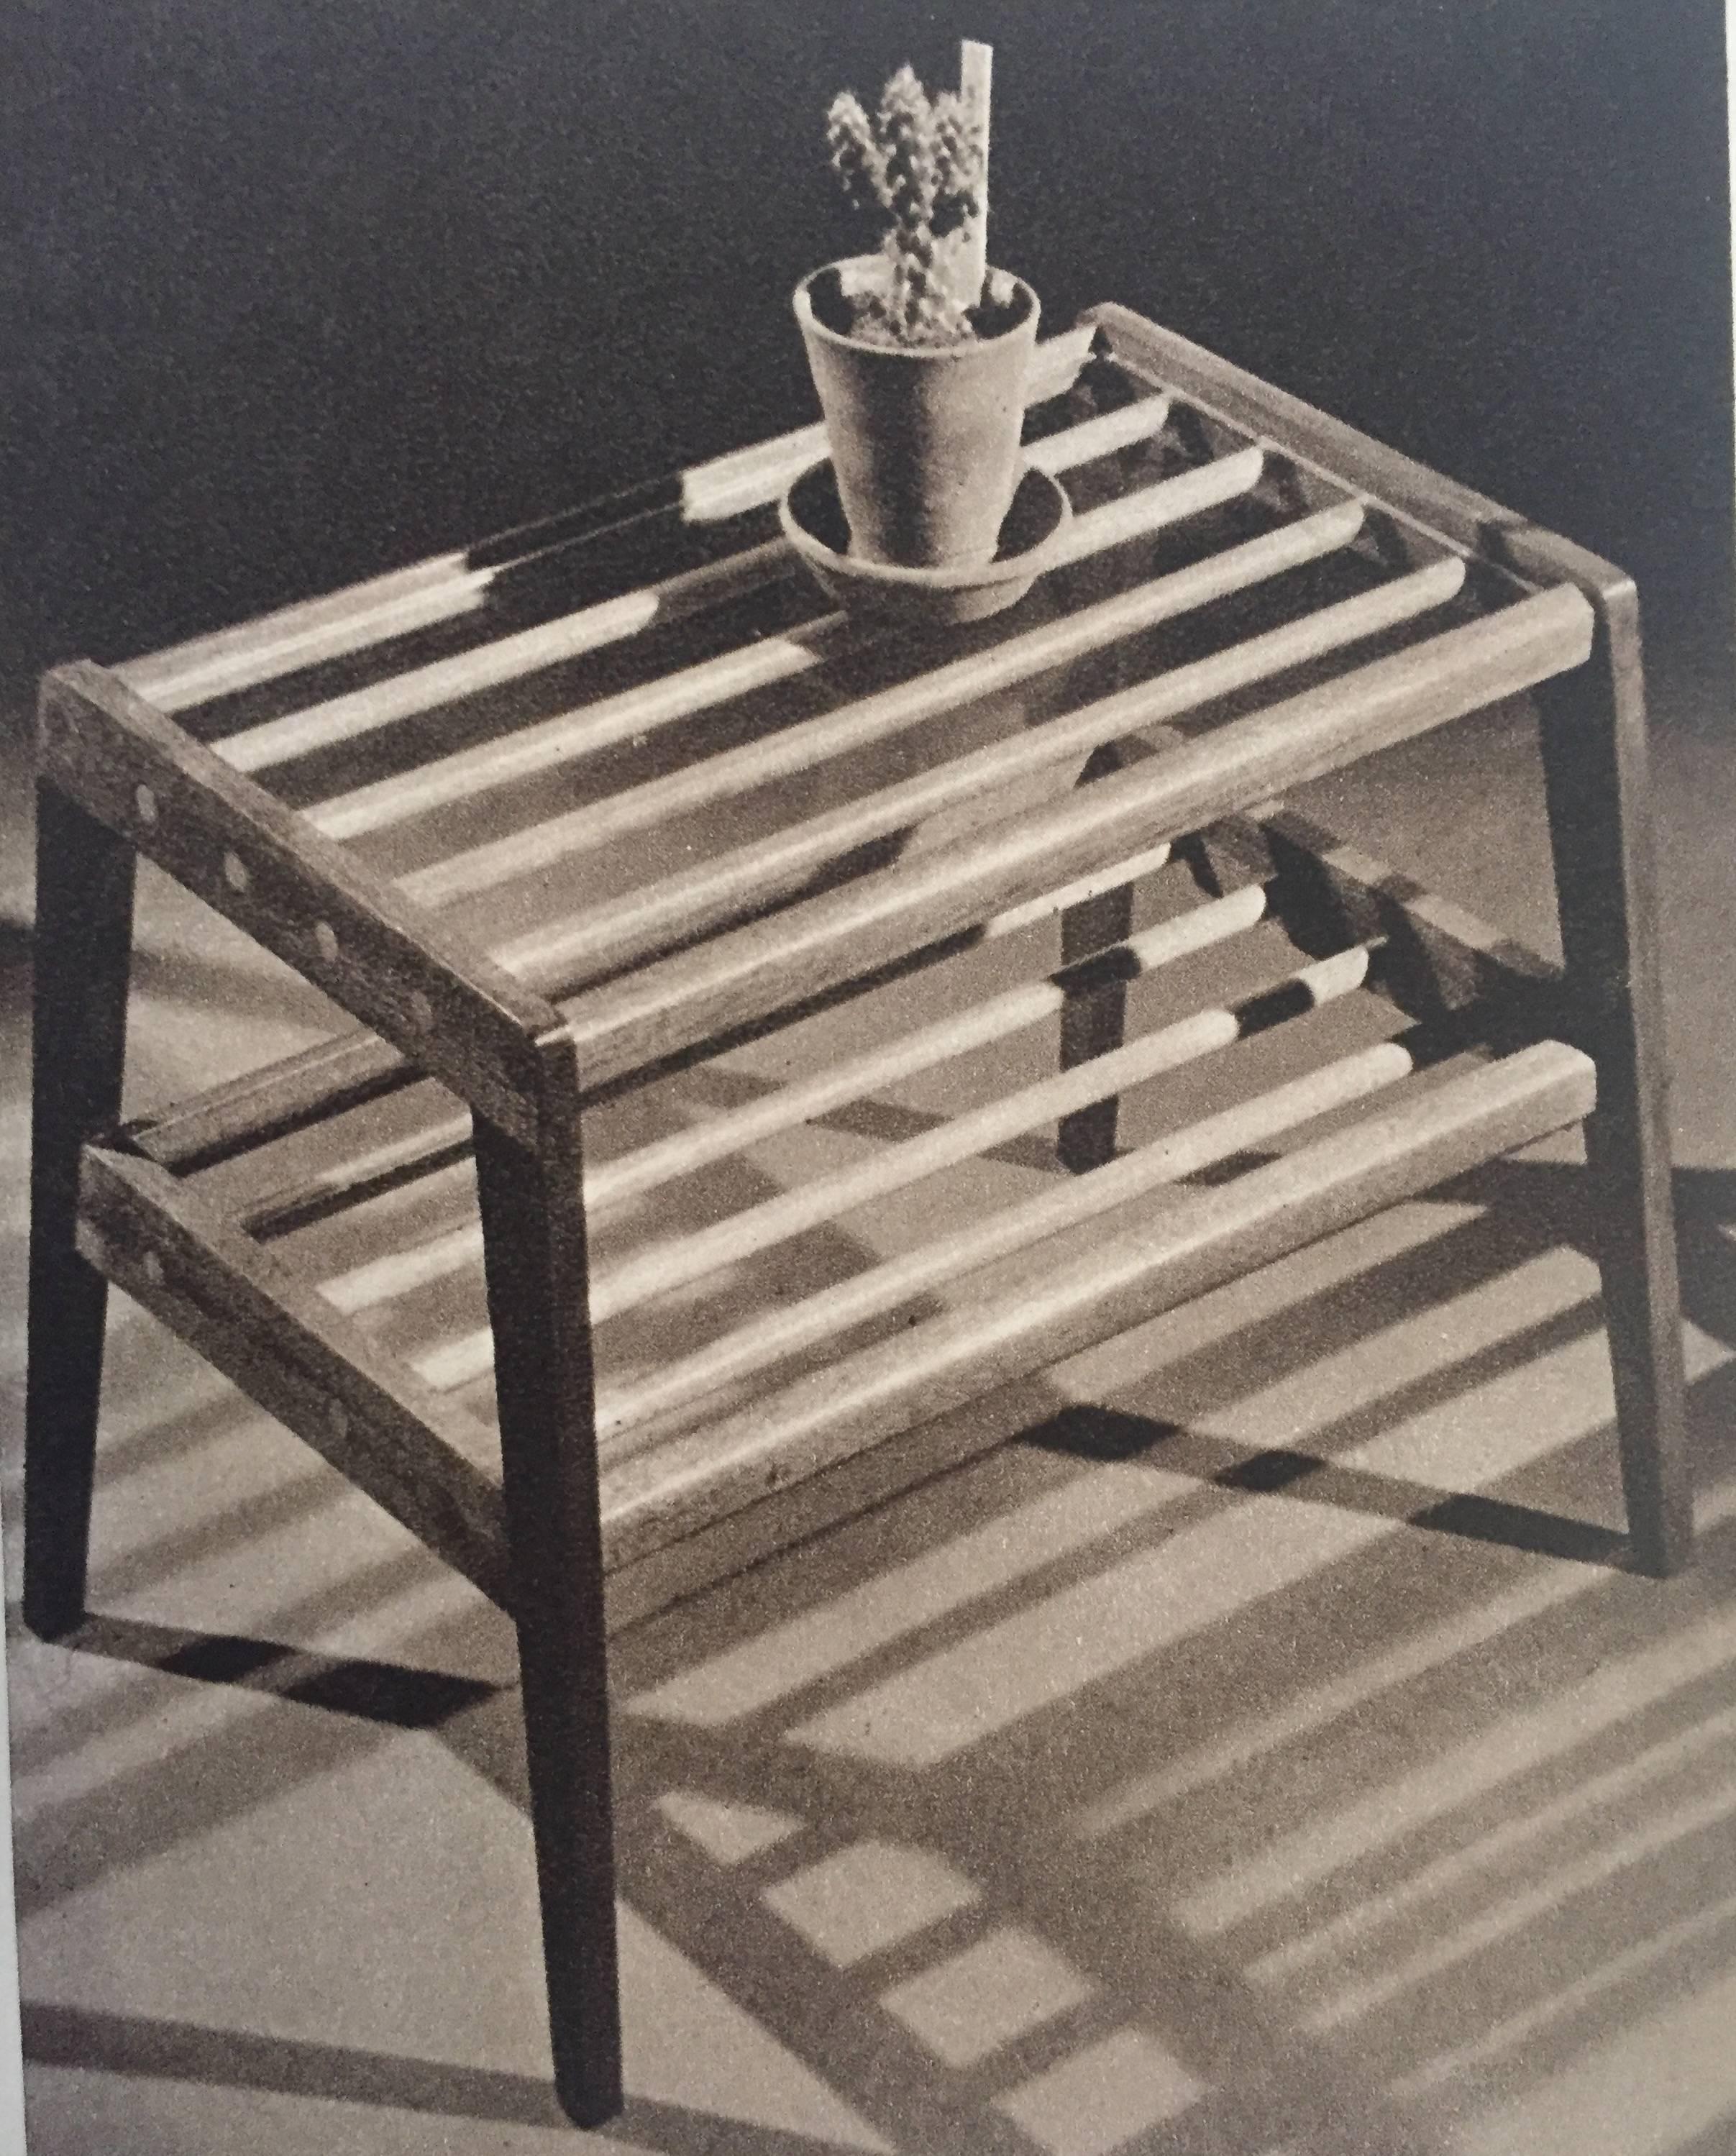 S. H Glenister, Contemporary Design in Woodwork, 1955 For Sale 4